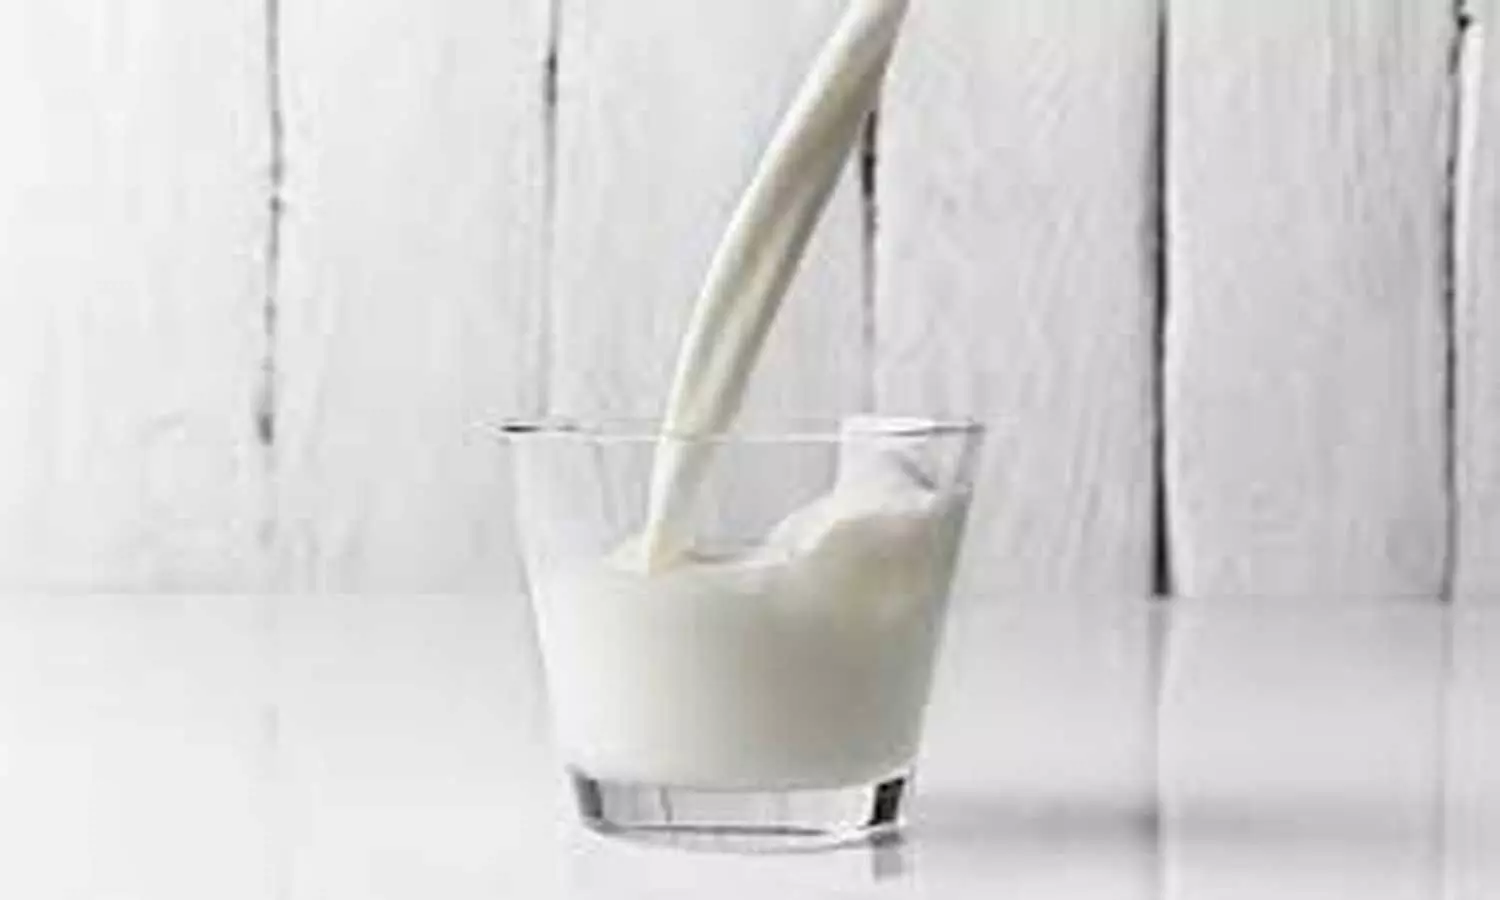 Dairy consumption does not prevent fractures in menopausal women: SWAN study